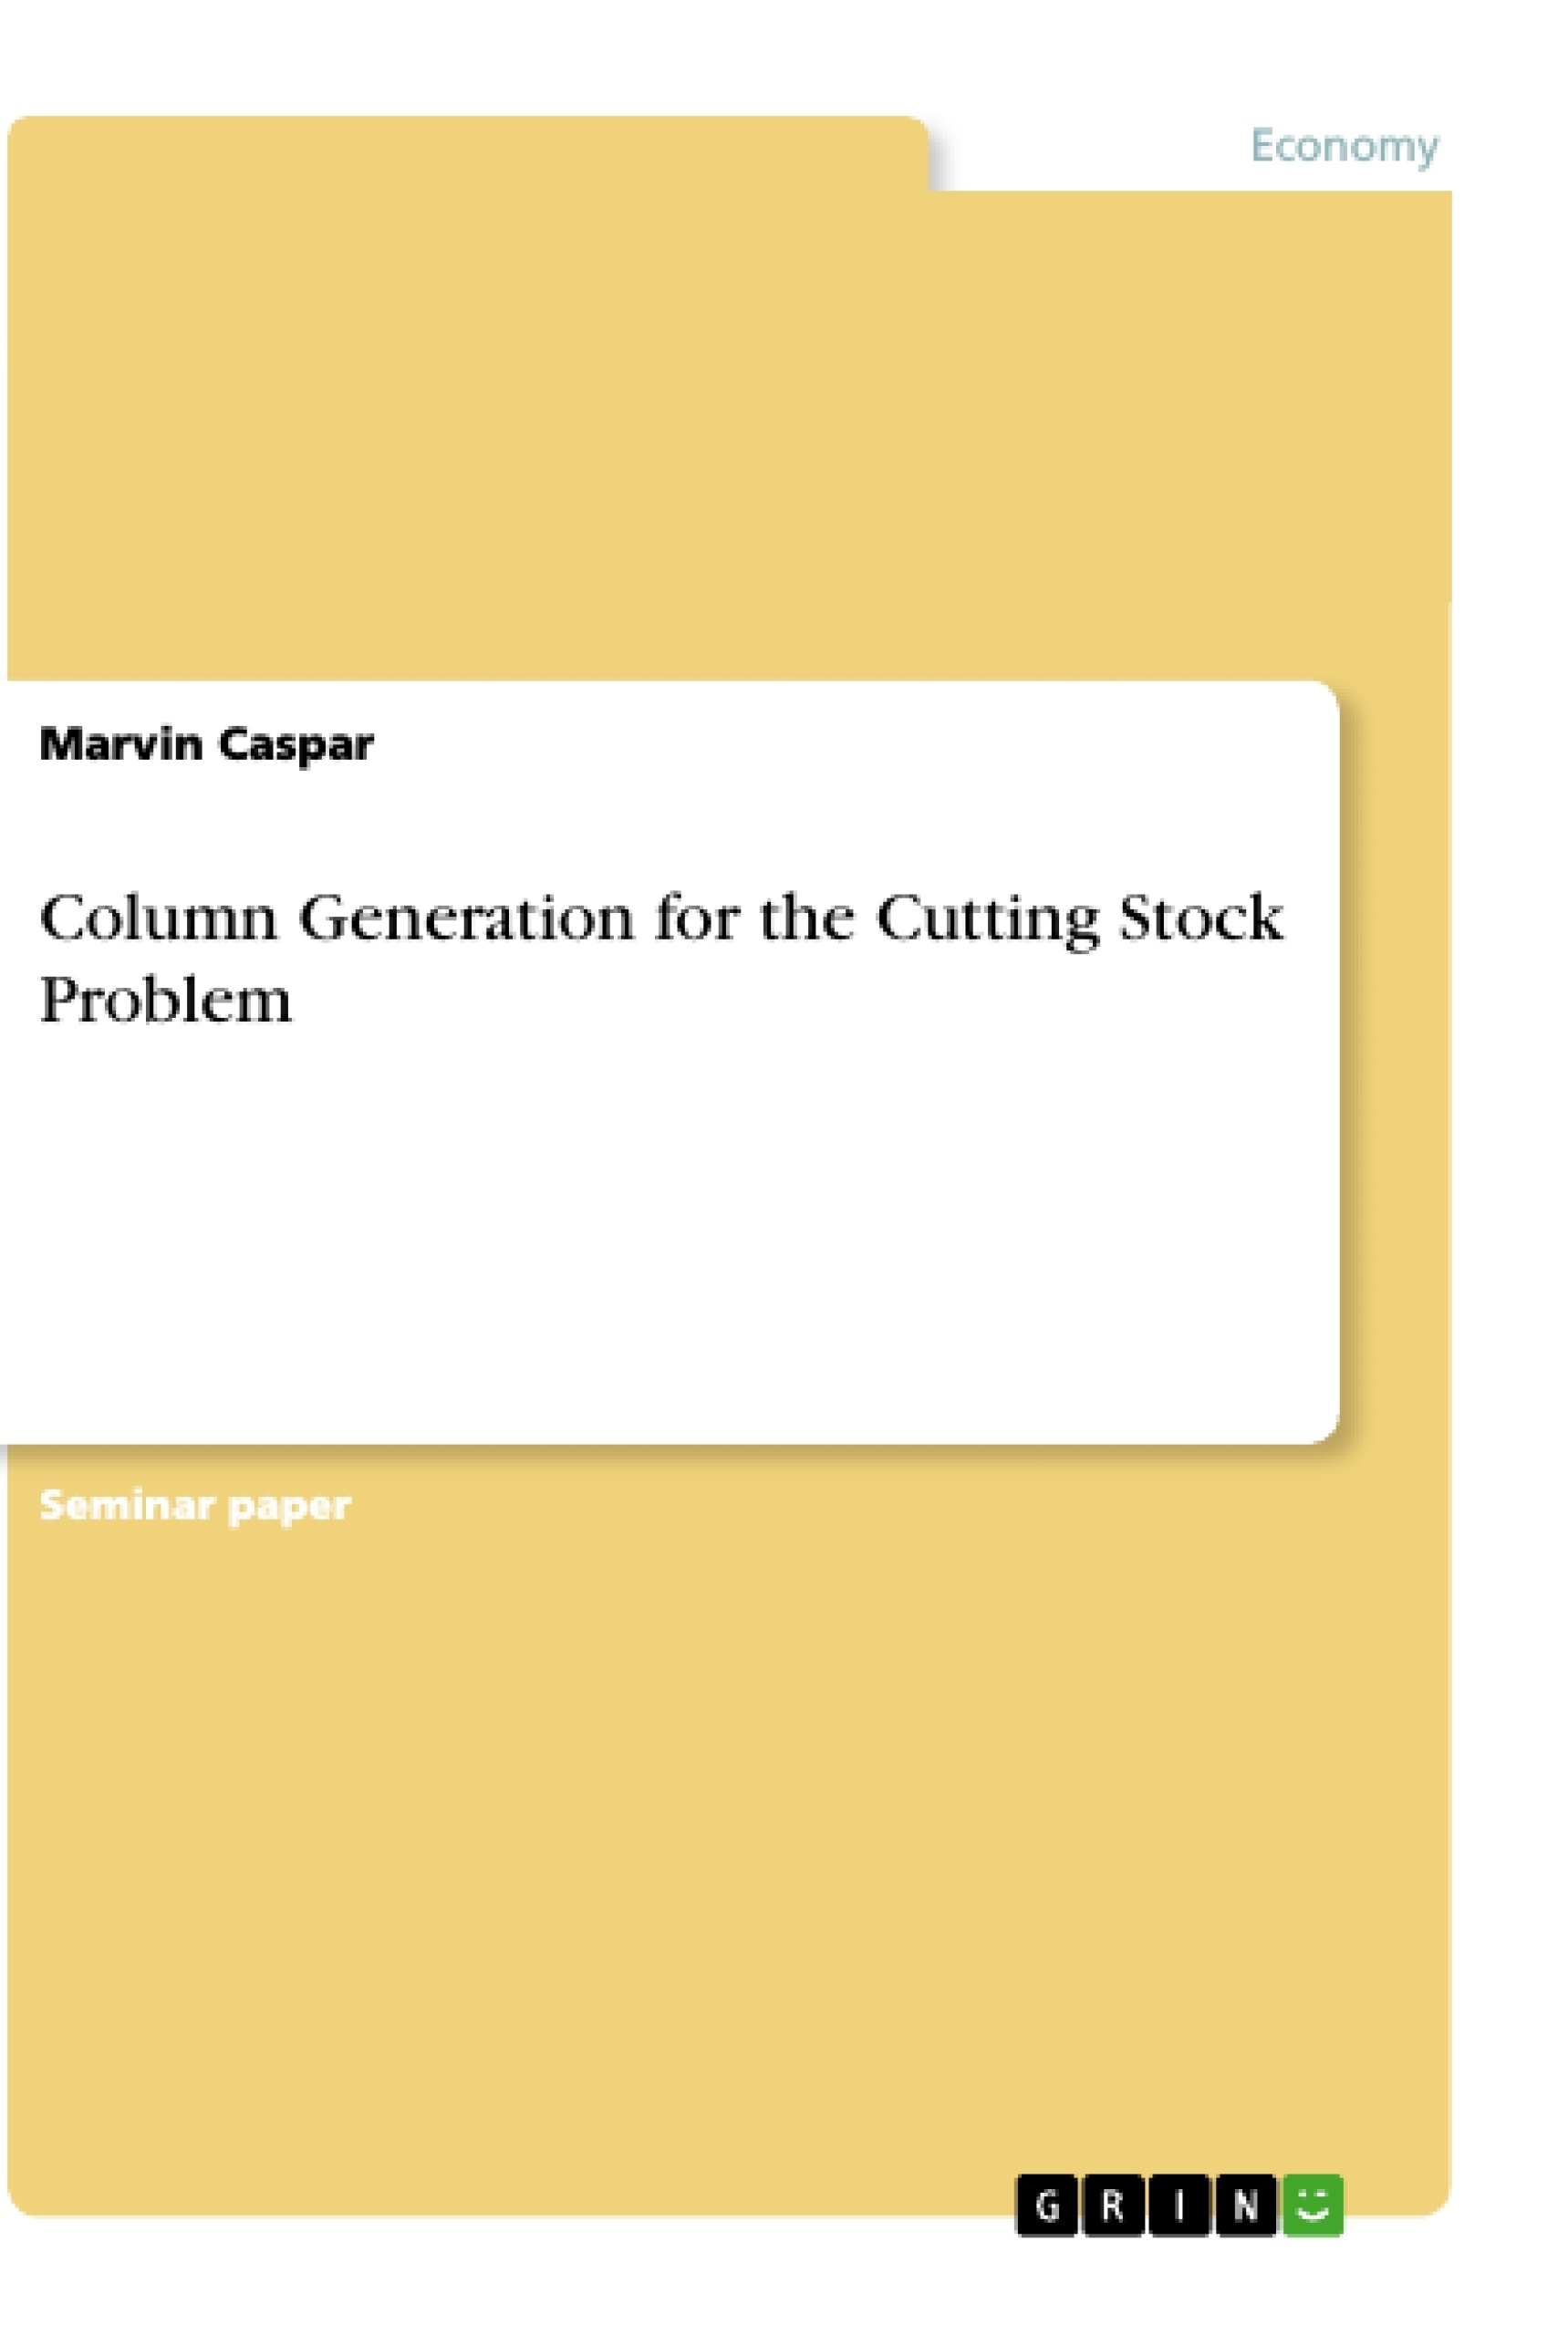 Título: Column Generation for the Cutting Stock Problem